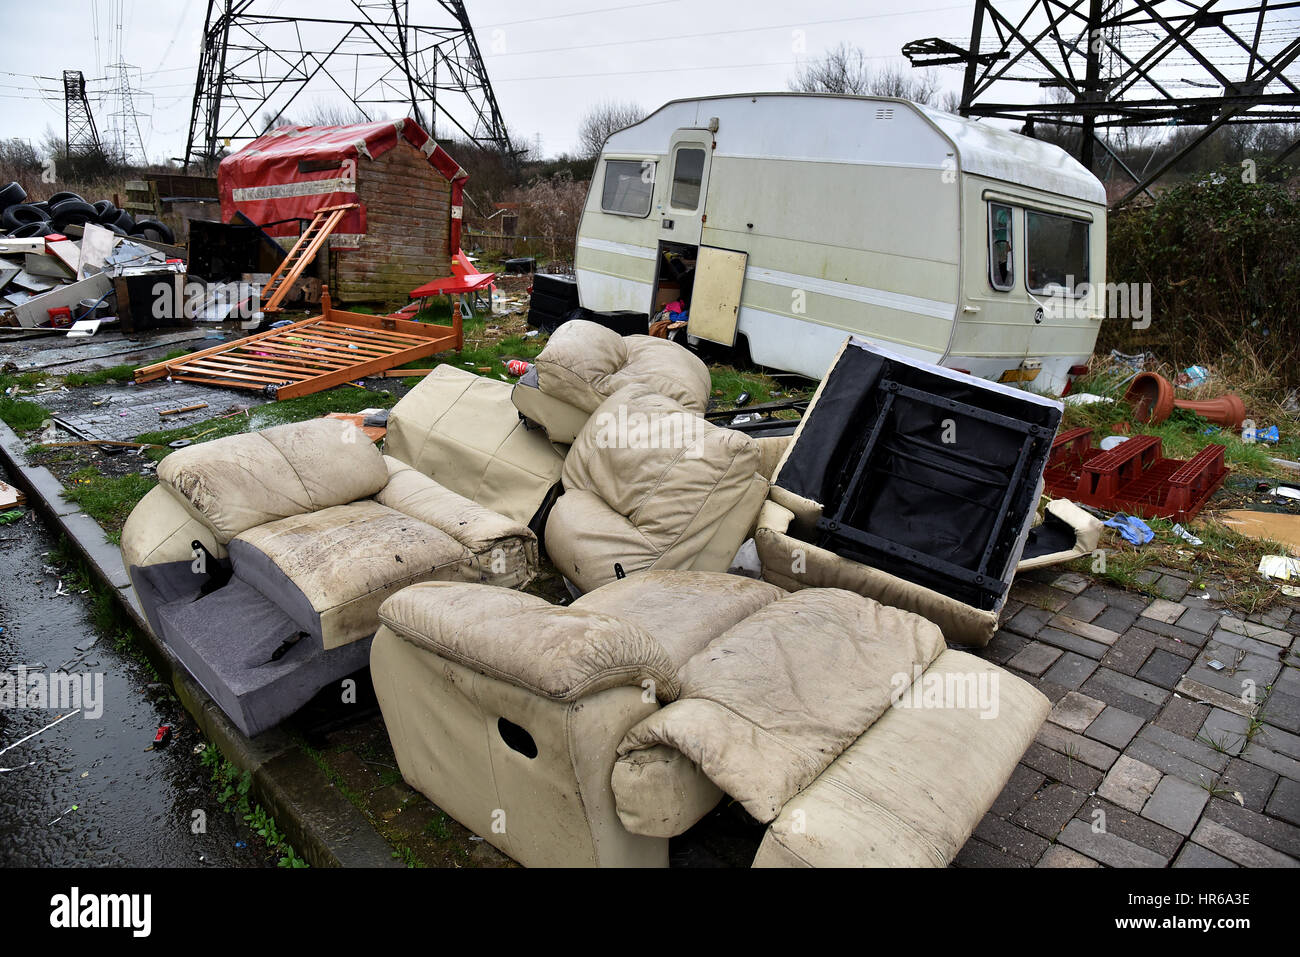 Travellers site, Tatton Road, Newport, South Wales. Smashed up caravans and fly-tipping, black bags and human waste left on the site. Stock Photo